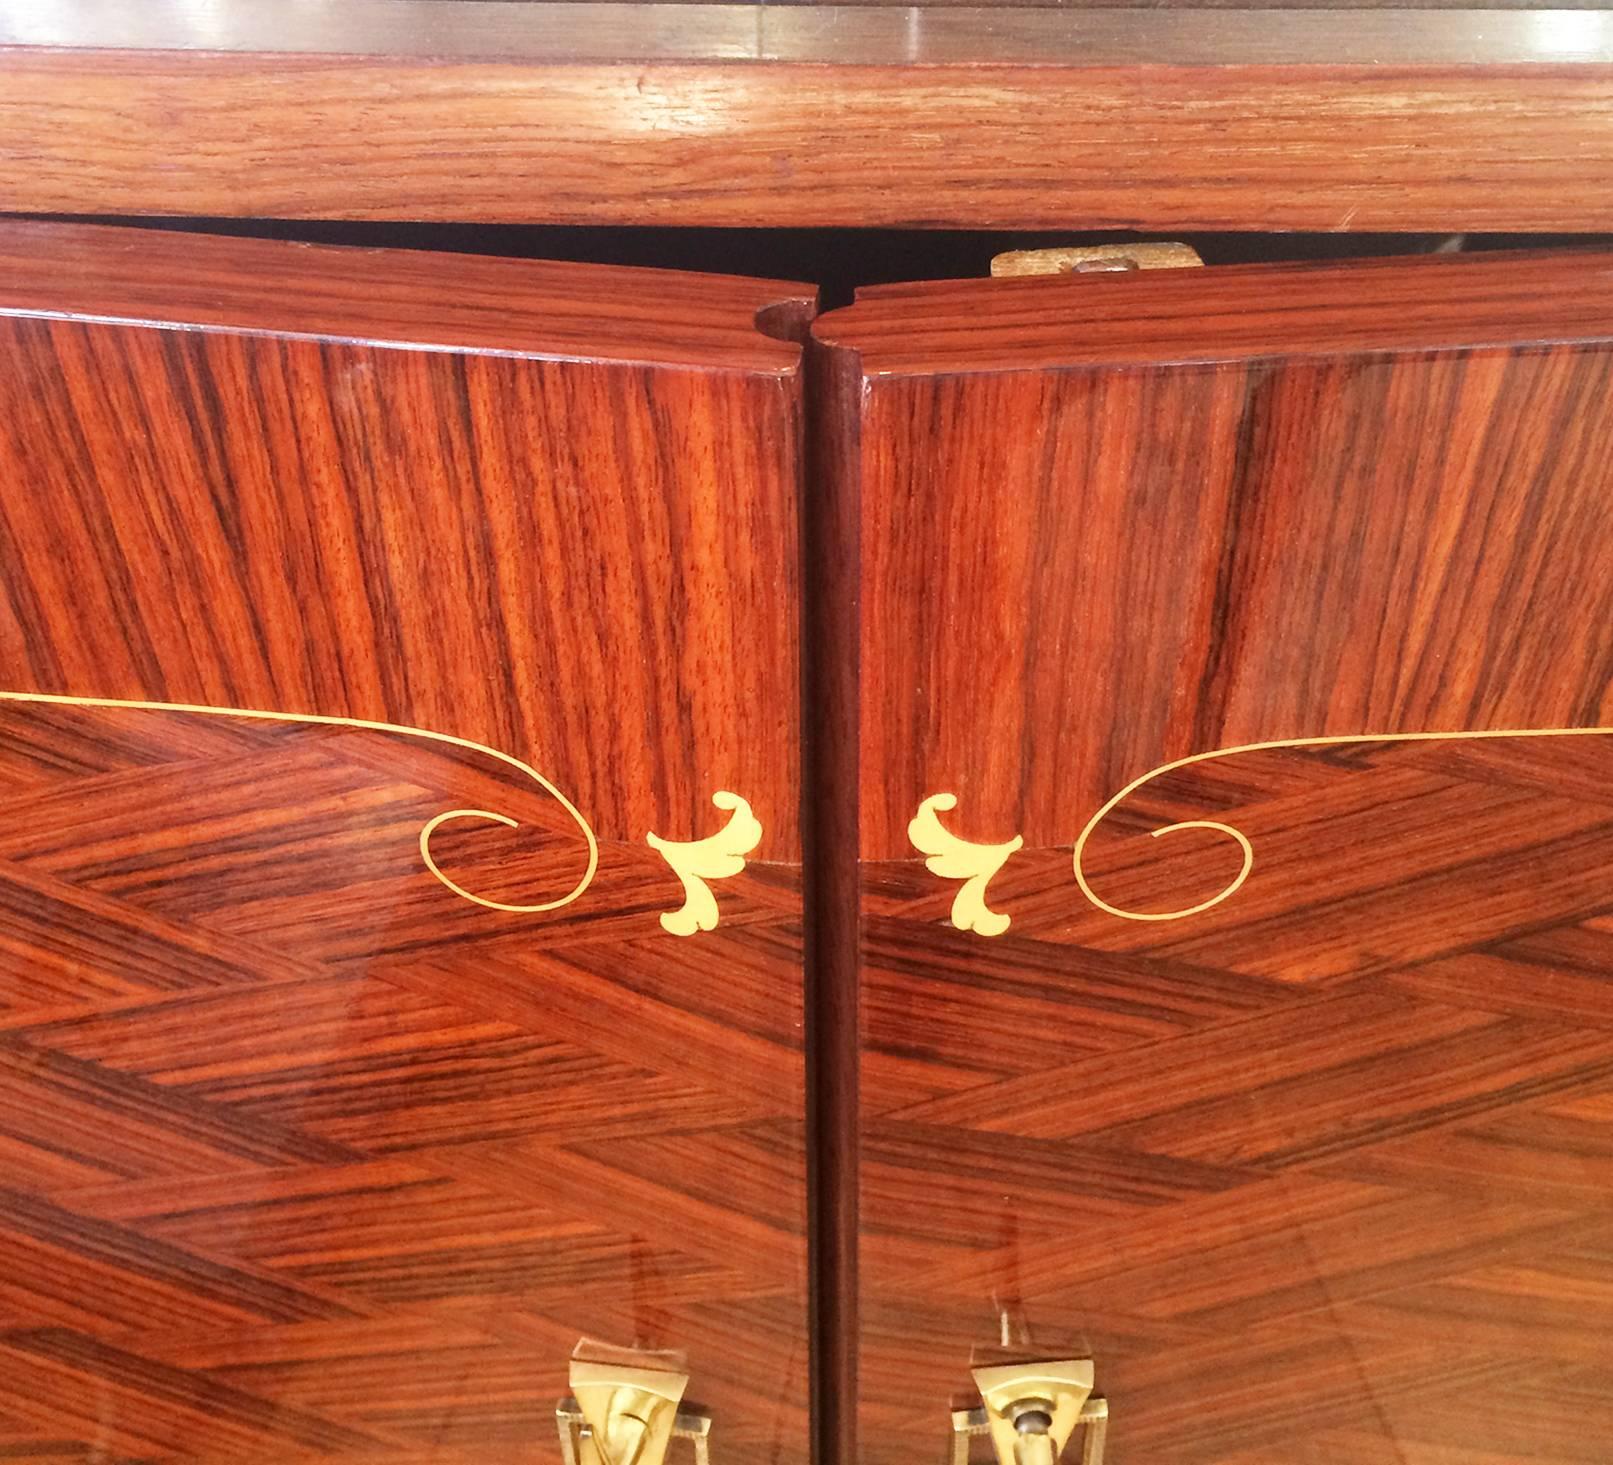 Art Deco finely inlaid French cabinet, for bar or display, inlaid with birch, and having interlocking door, security, triple lock point mechanism, double throw French lock, and adjustable leg heights. Extremely fine craftsmanship to the inlay, and